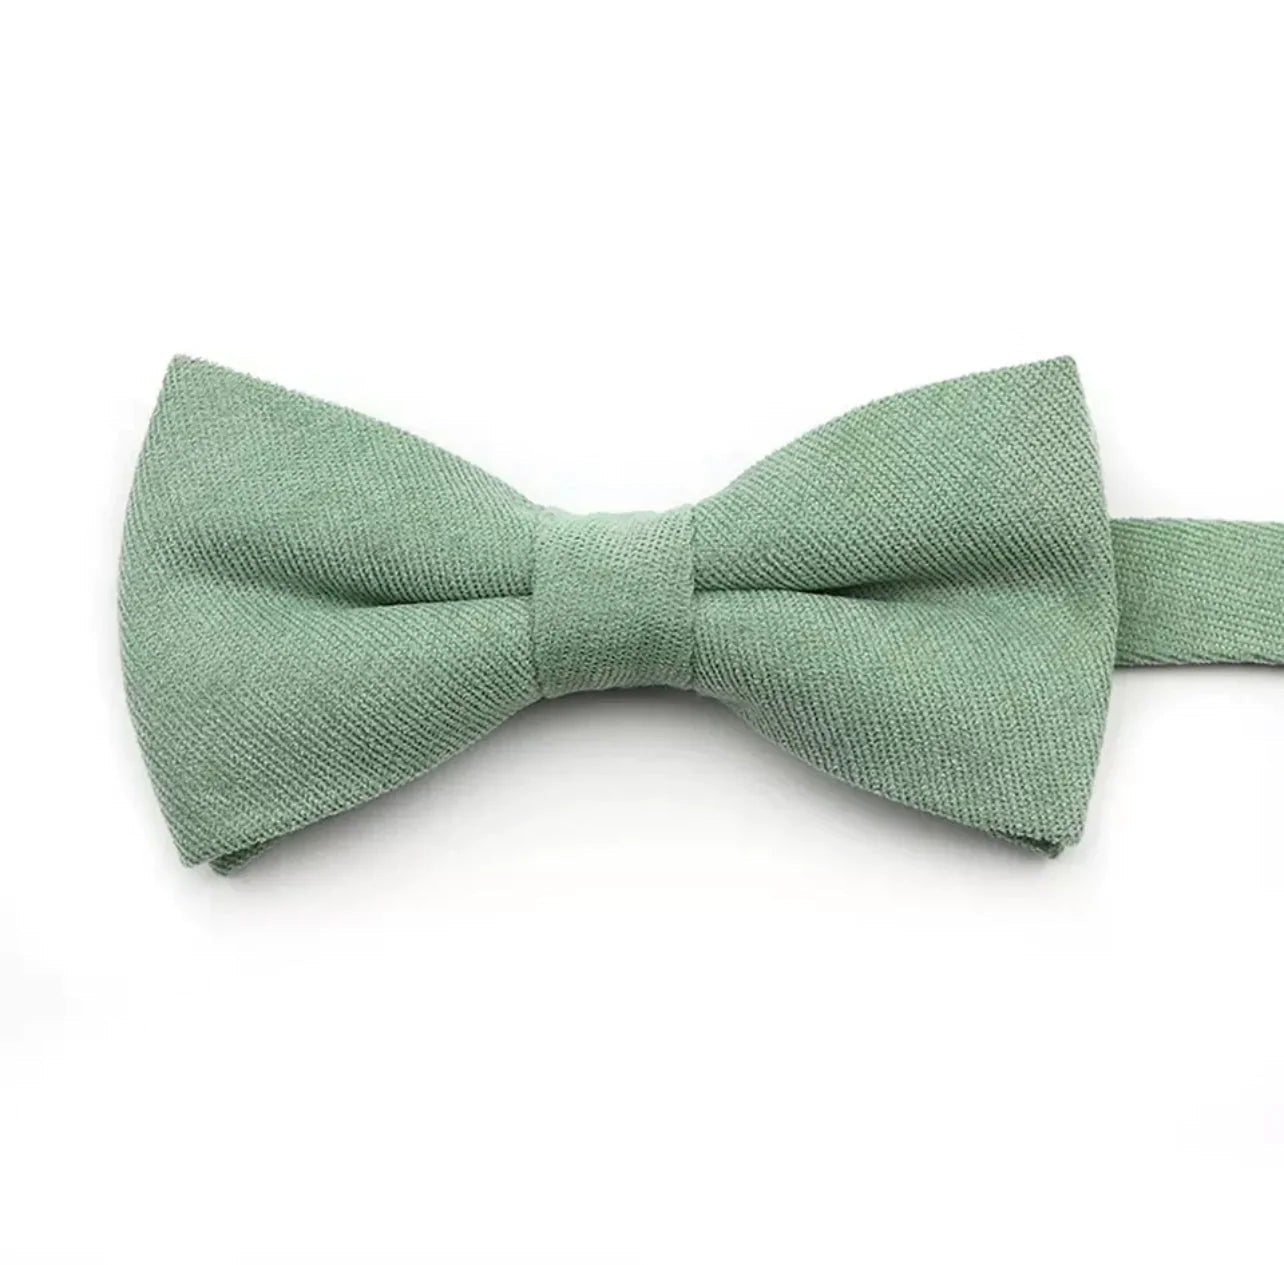 Sage Green Bow Tie (Pretied) for Adults - EMME by MYTIESHOP-Green Bow Tie (Pretied) for Adults Strap is Adjustable - 32CM Long (10-18 Inches) Pre-Tied bowtie Bow Tie 12CM * 6CMMade from Cotton Great for Weddings Events Family Shoots Styled Shoots Wedding Photography Walking in weddings Mens Green Bow Tie great for weddings and events. Great for the Groom and Groomsmen to wear at the wedding. Serves as a great gift idea; for anniversaries or wedding presents. Looks great in styled shoots and wedd